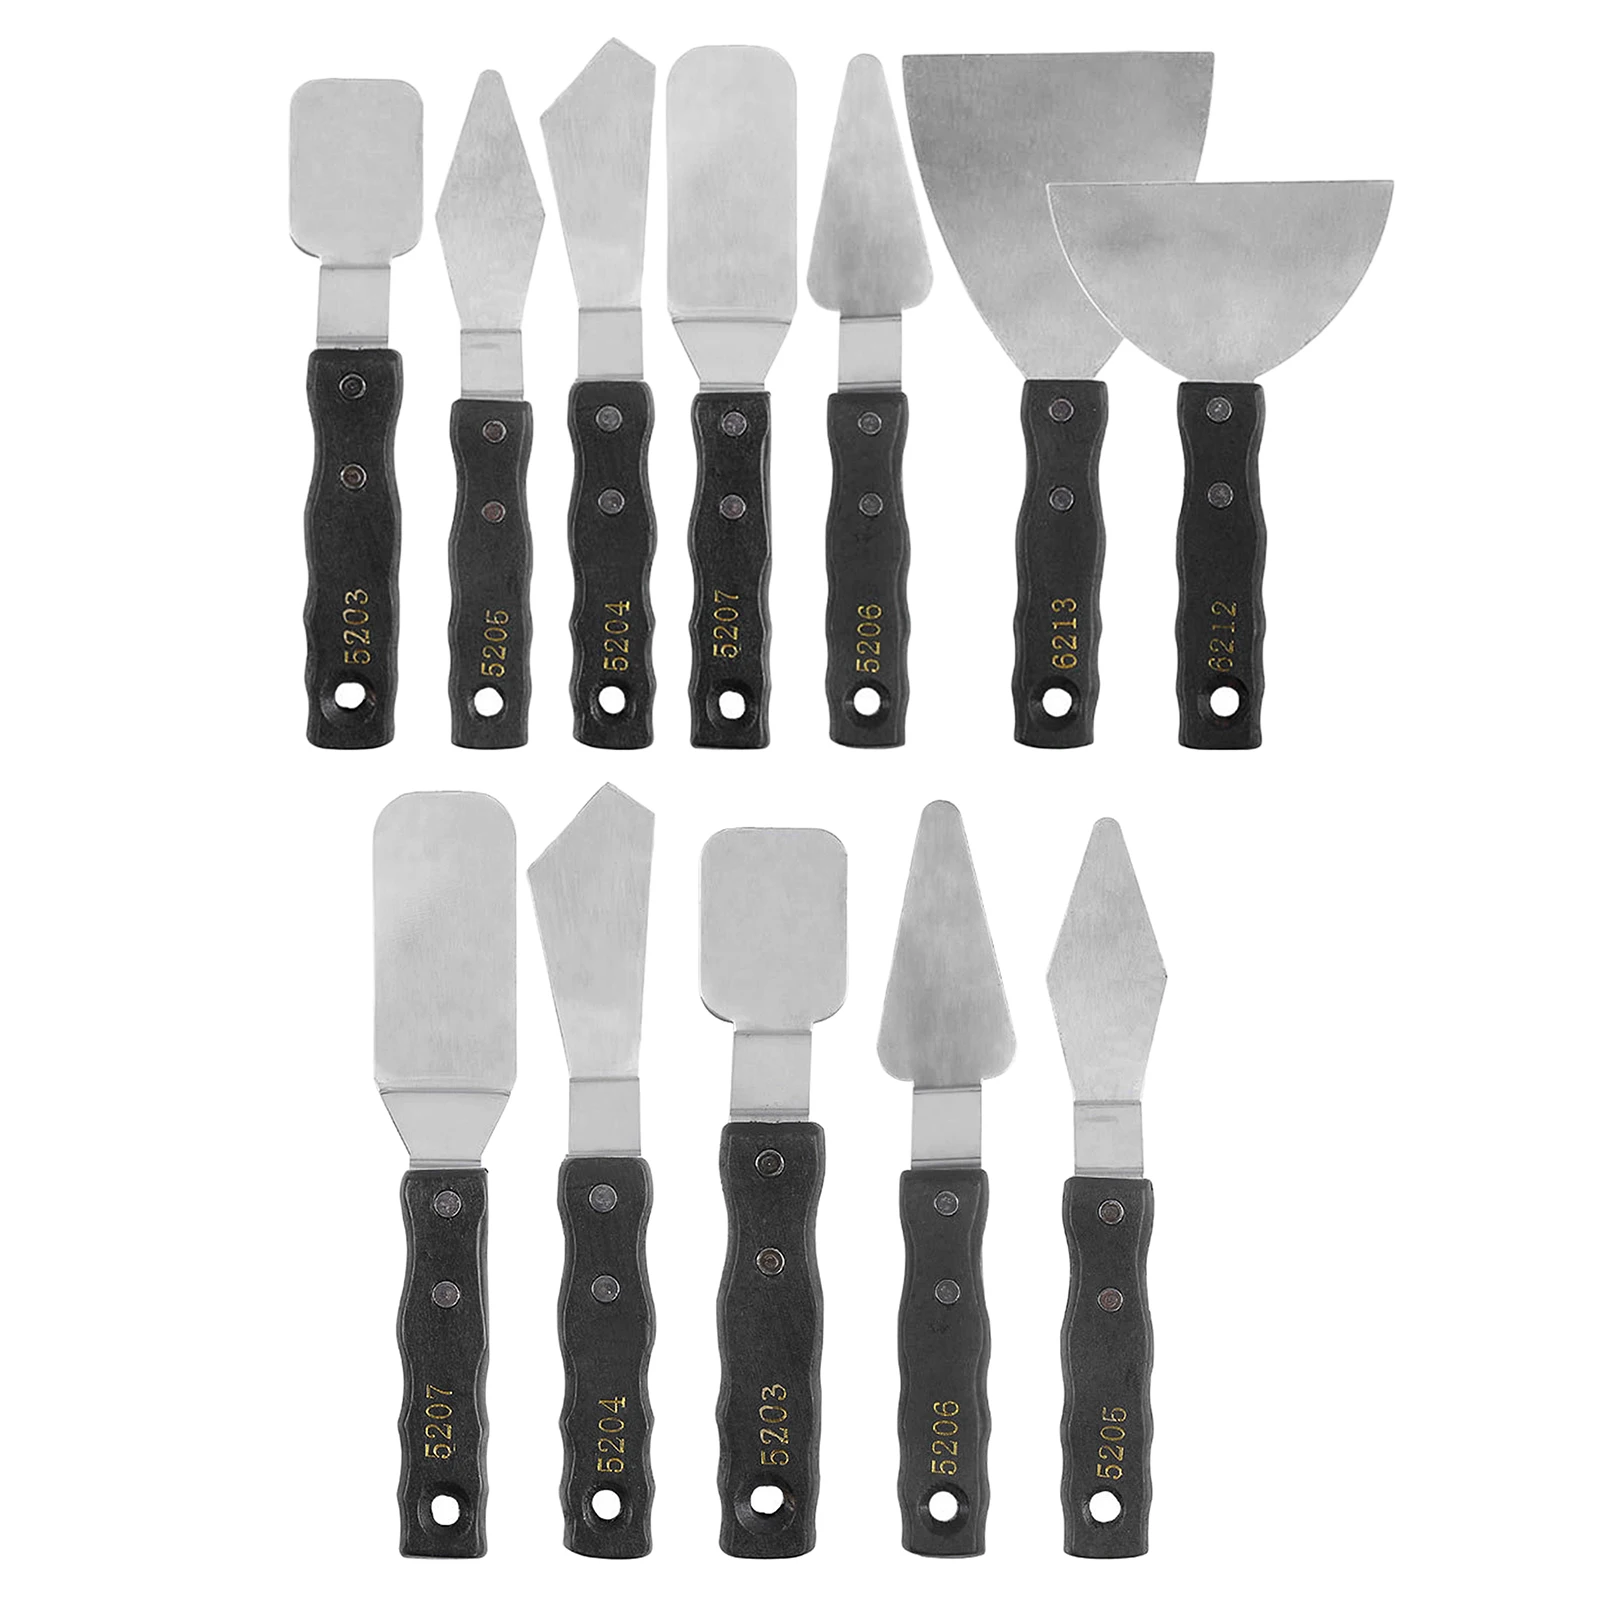 5/7Pcs Wooden Handle Palette Knife Set, Different Sizes and Styles of Stainless Steel Palette Knives for Acrylic Oil Painting